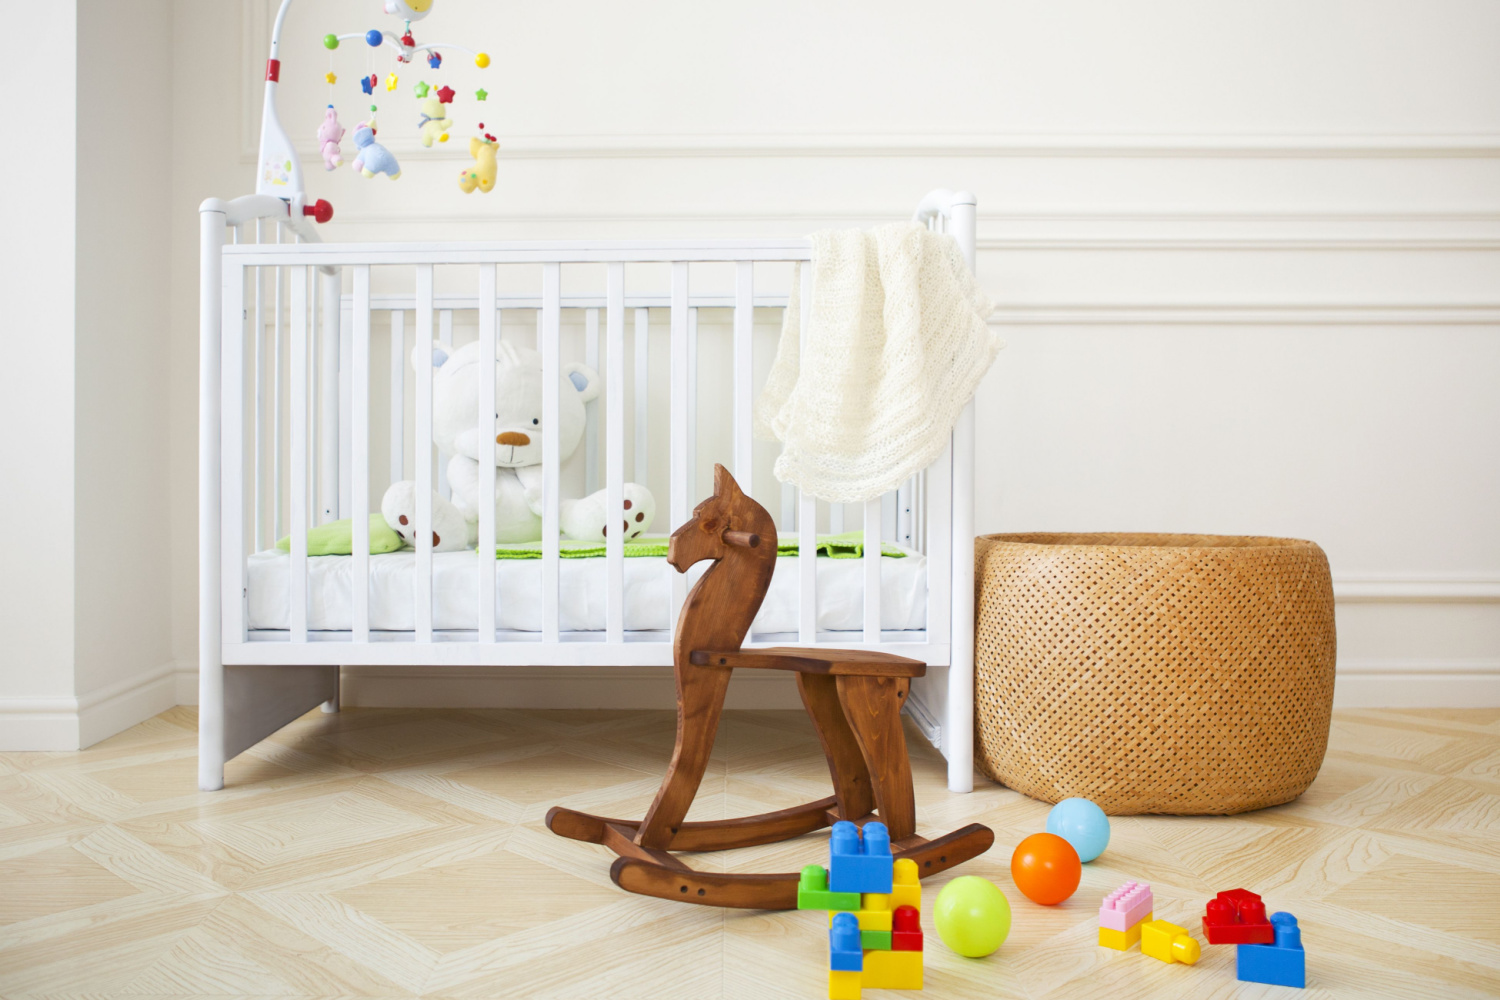 A crib in a kid's room